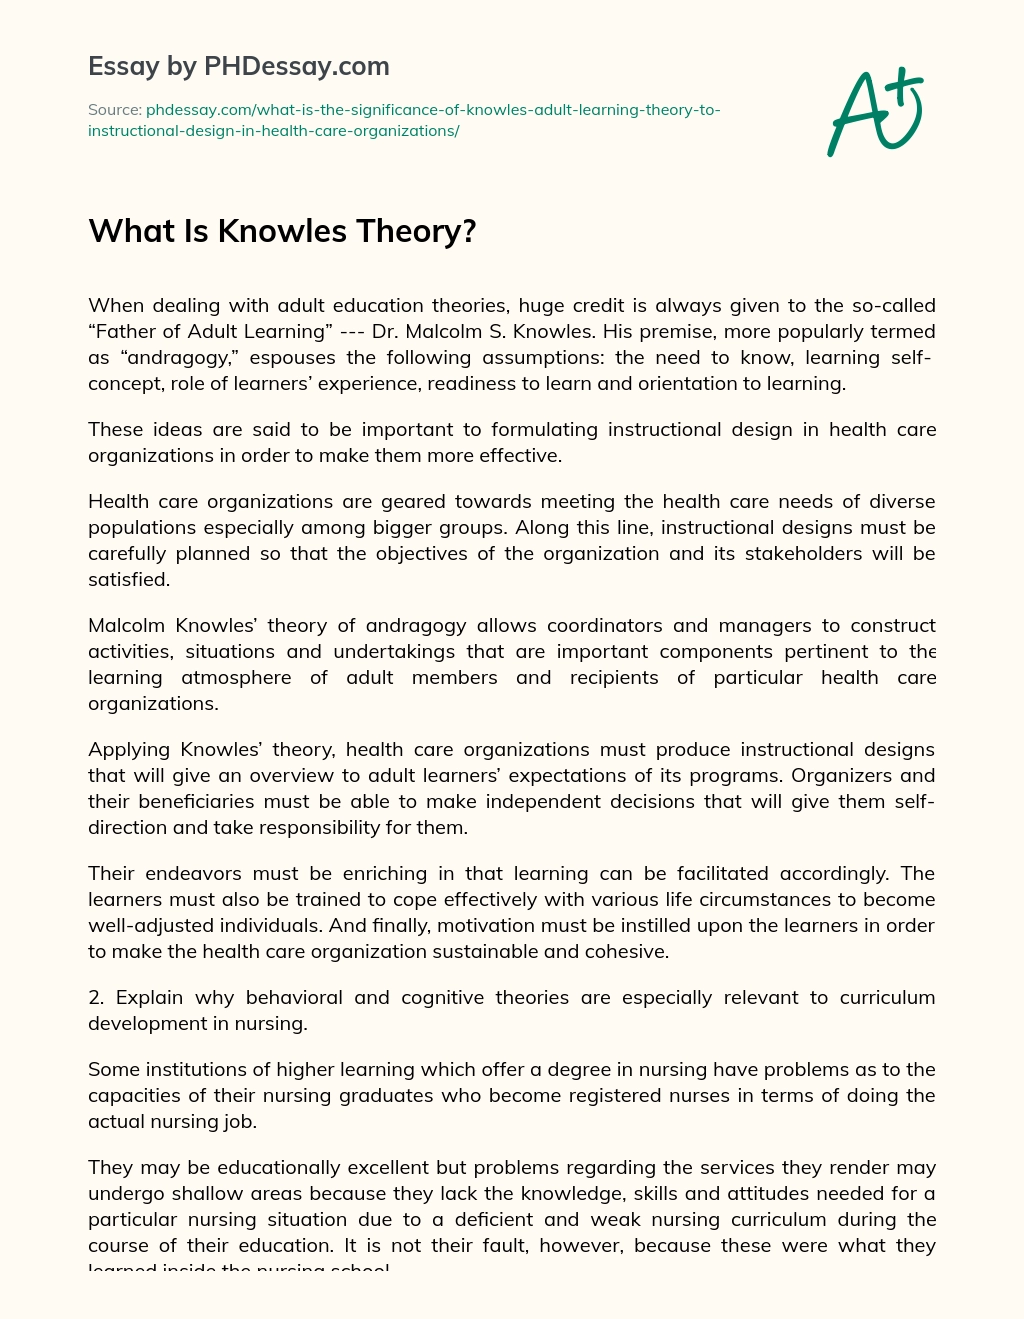 What Is Knowles Theory? essay